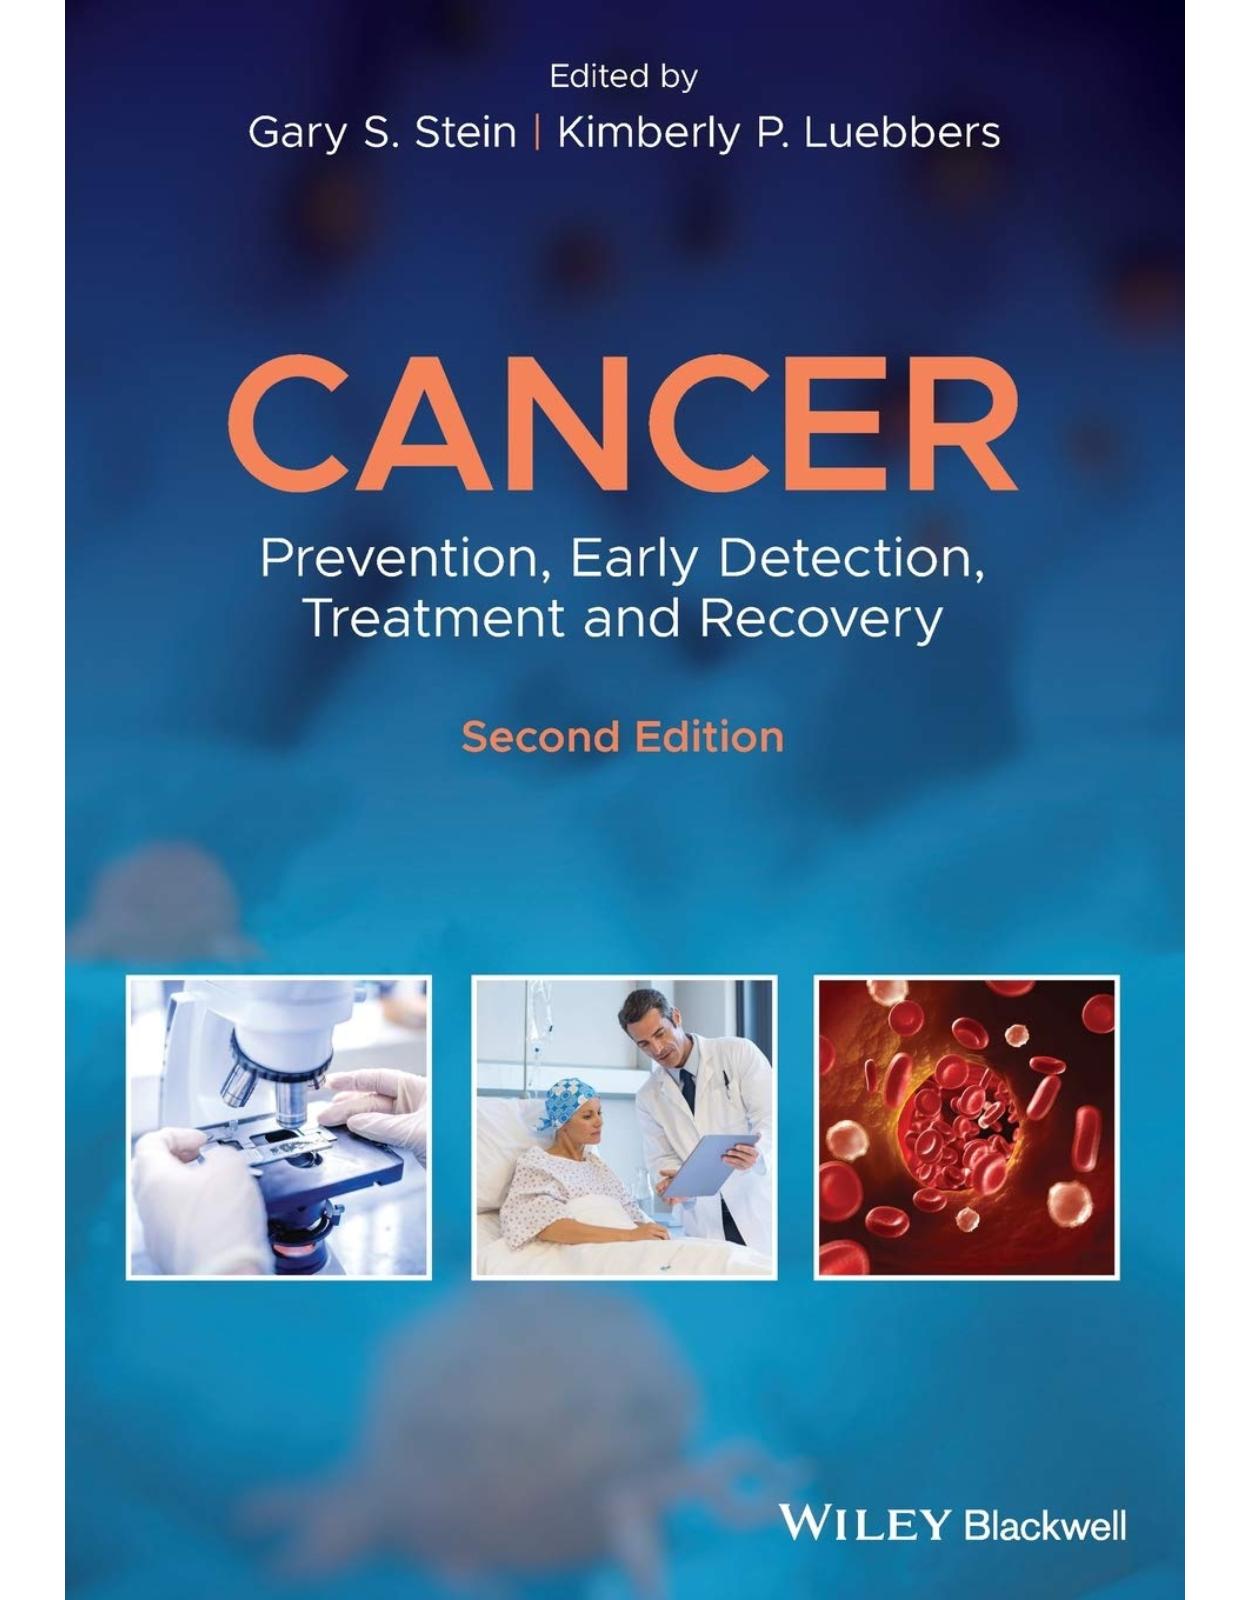 Cancer: Prevention, Early Detection, Treatment and Recovery, 2nd Edition